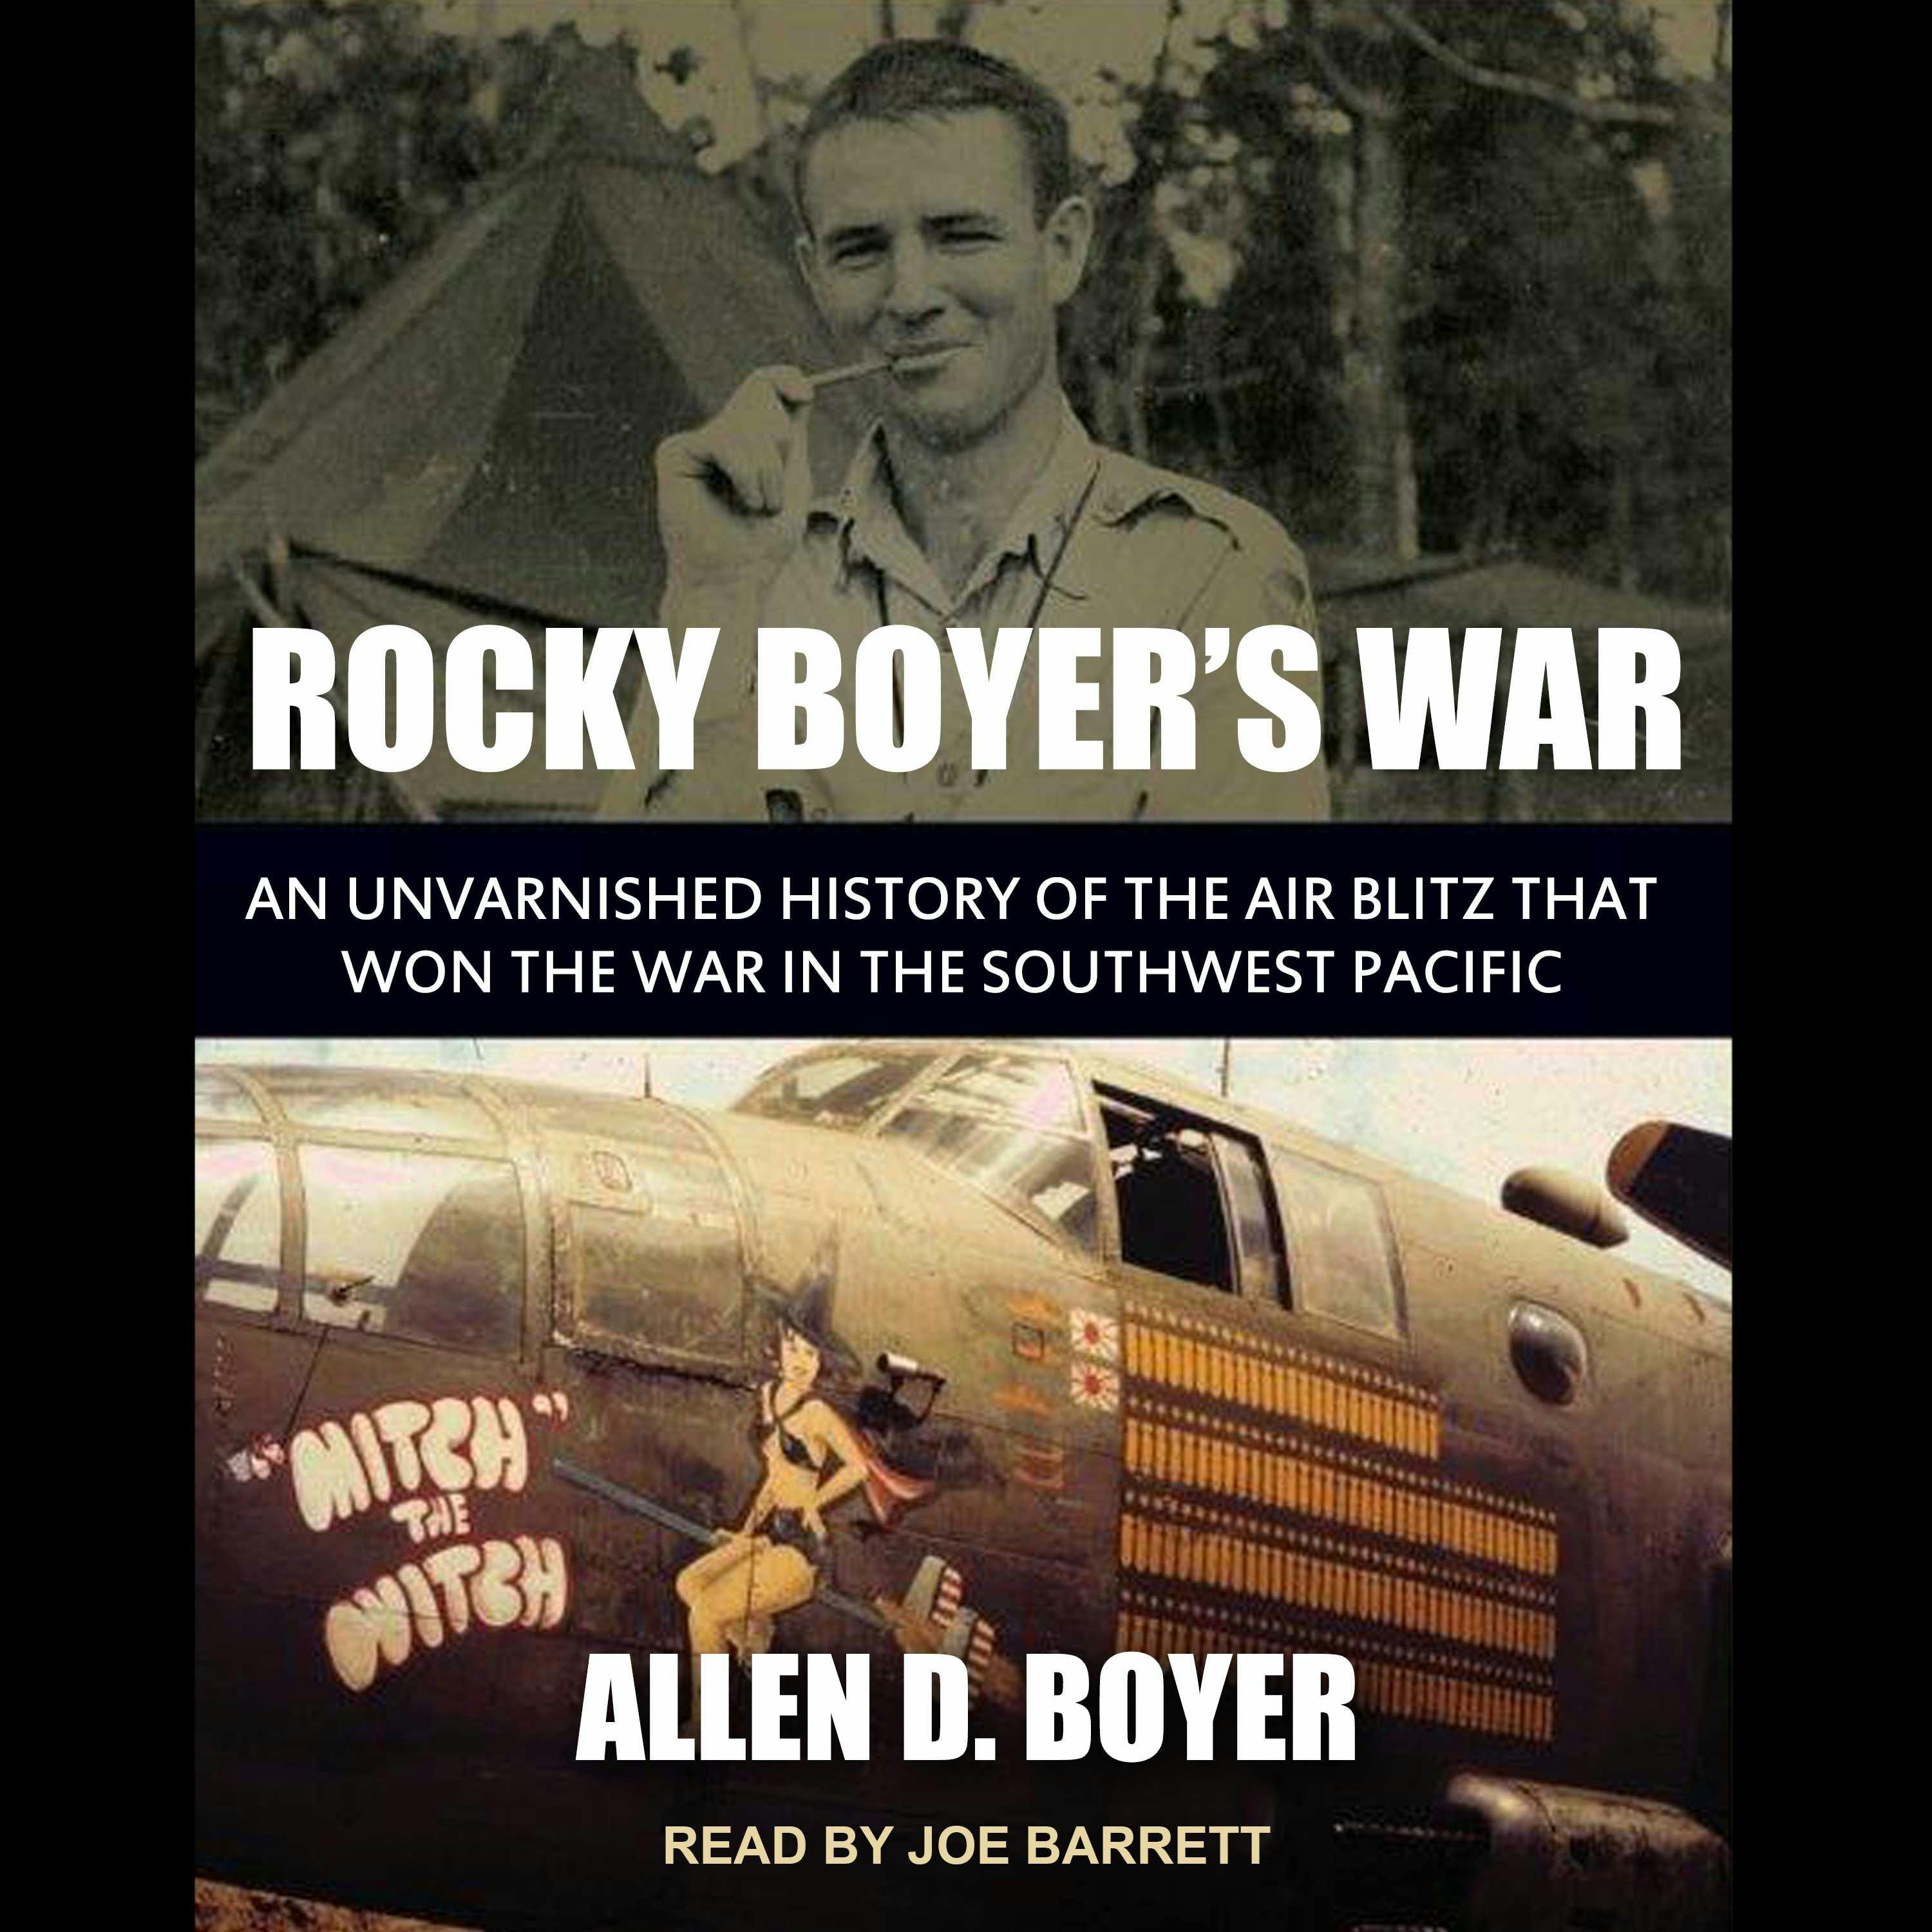 Rocky Boyer's War: An Unvarnished History of the Air Blitz that Won the War in the Southwest Pacific - Allen D. Boyer